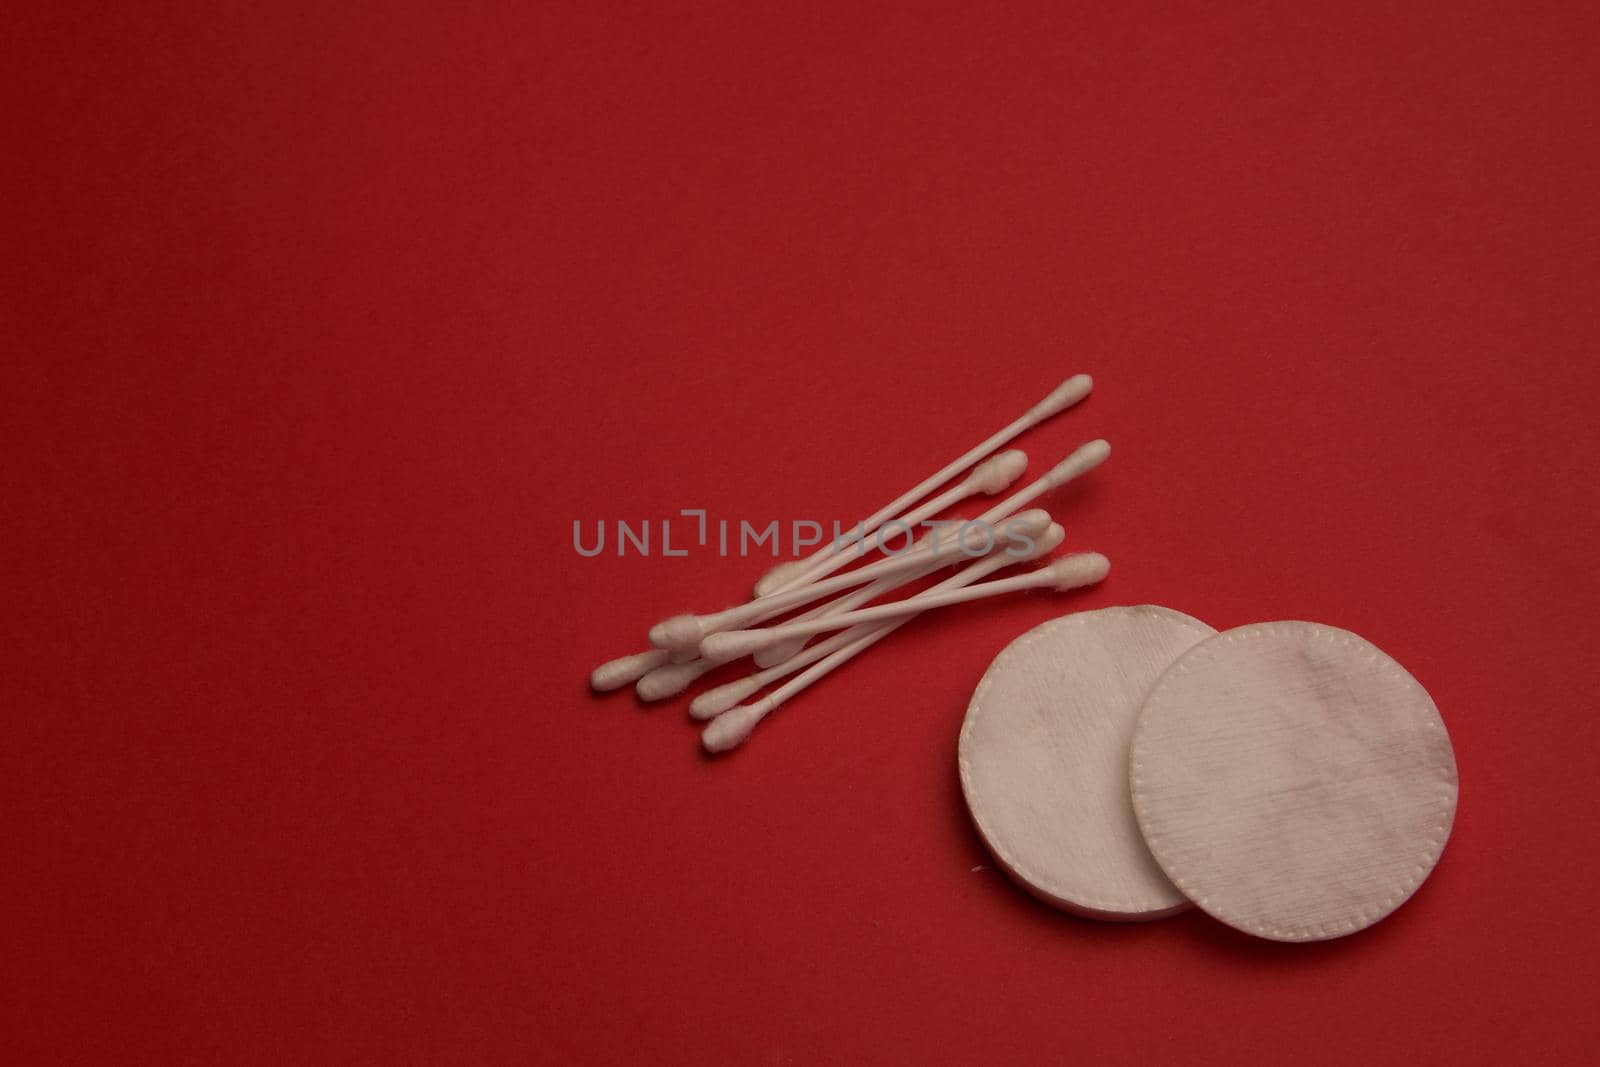 cotton swabs hygiene accessories care red background by Vichizh